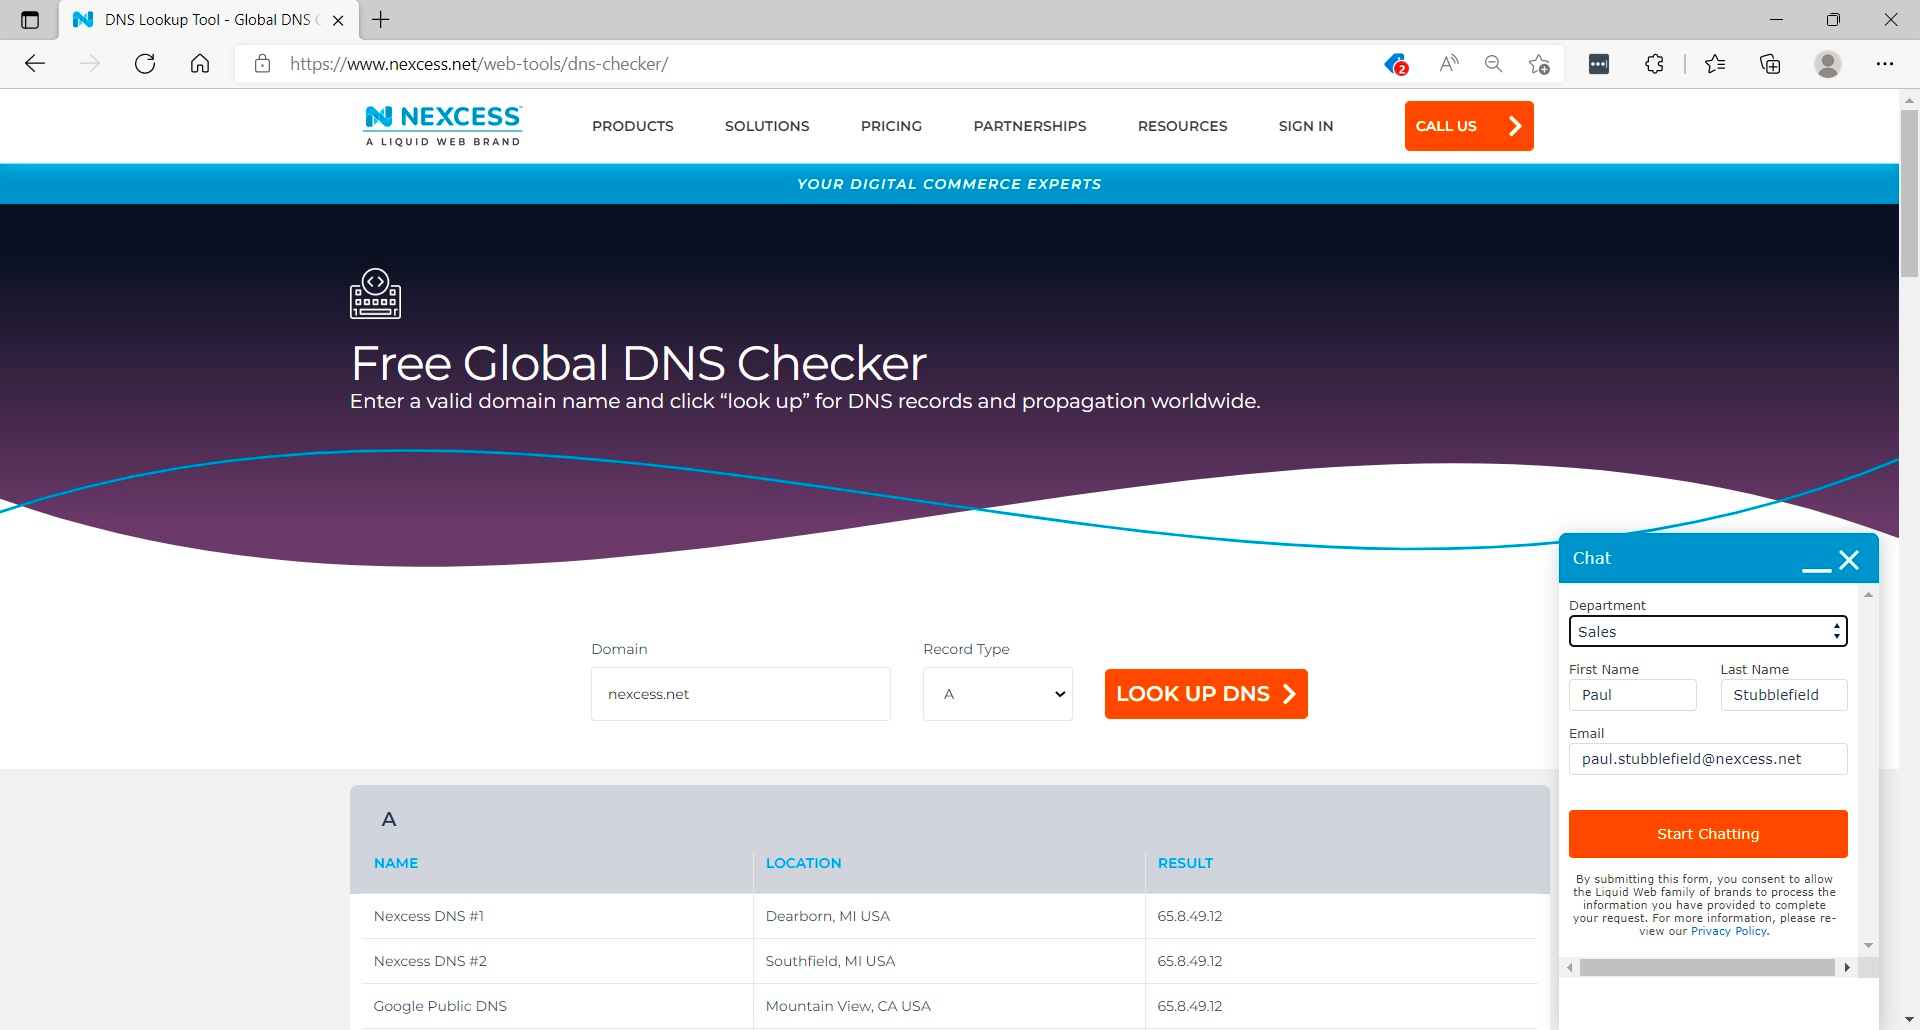 If you want to learn how to find a domain IP address, use our DNS checker tool